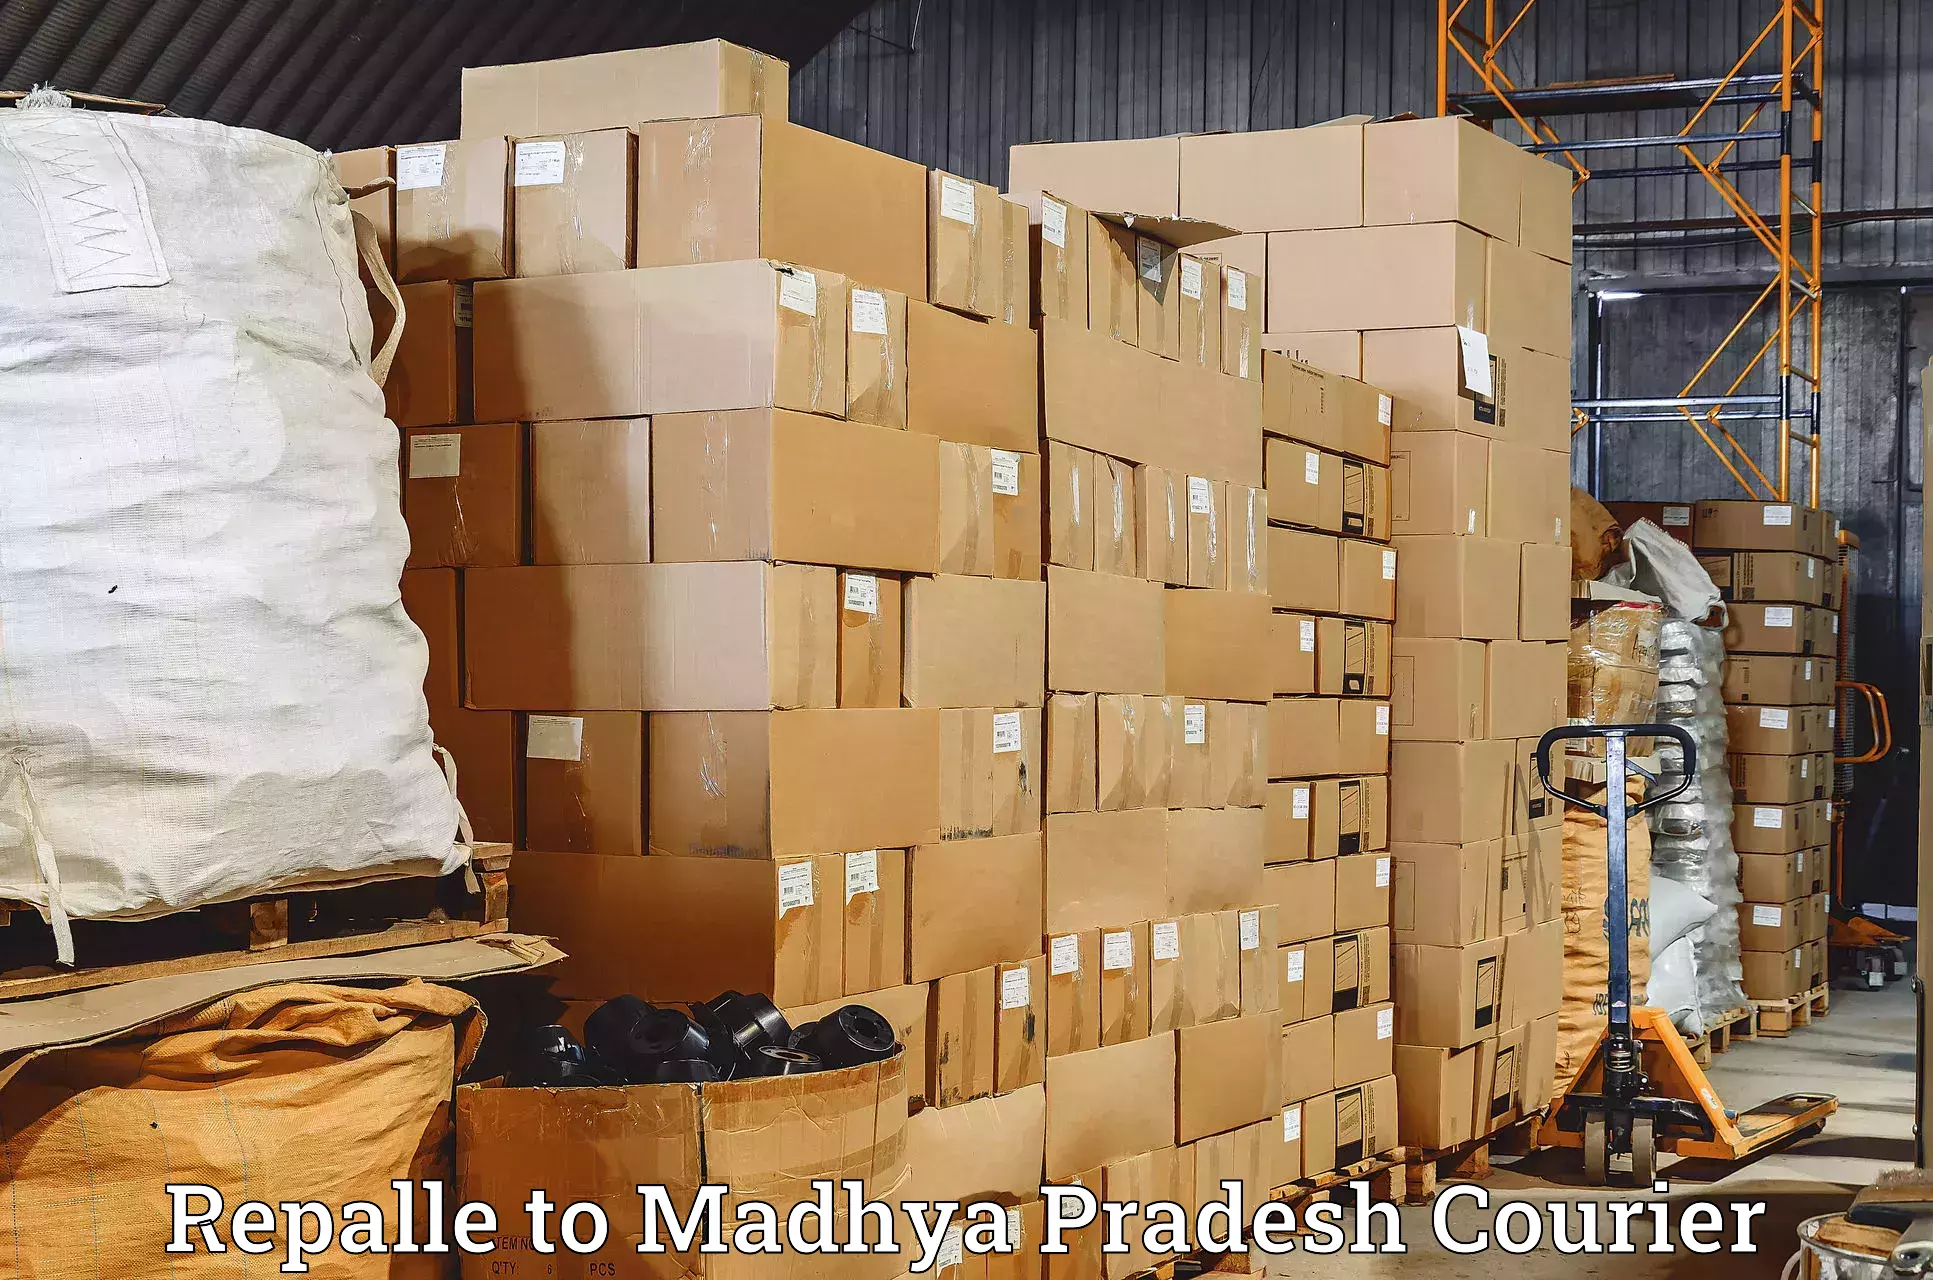 International courier networks Repalle to IIIT Bhopal